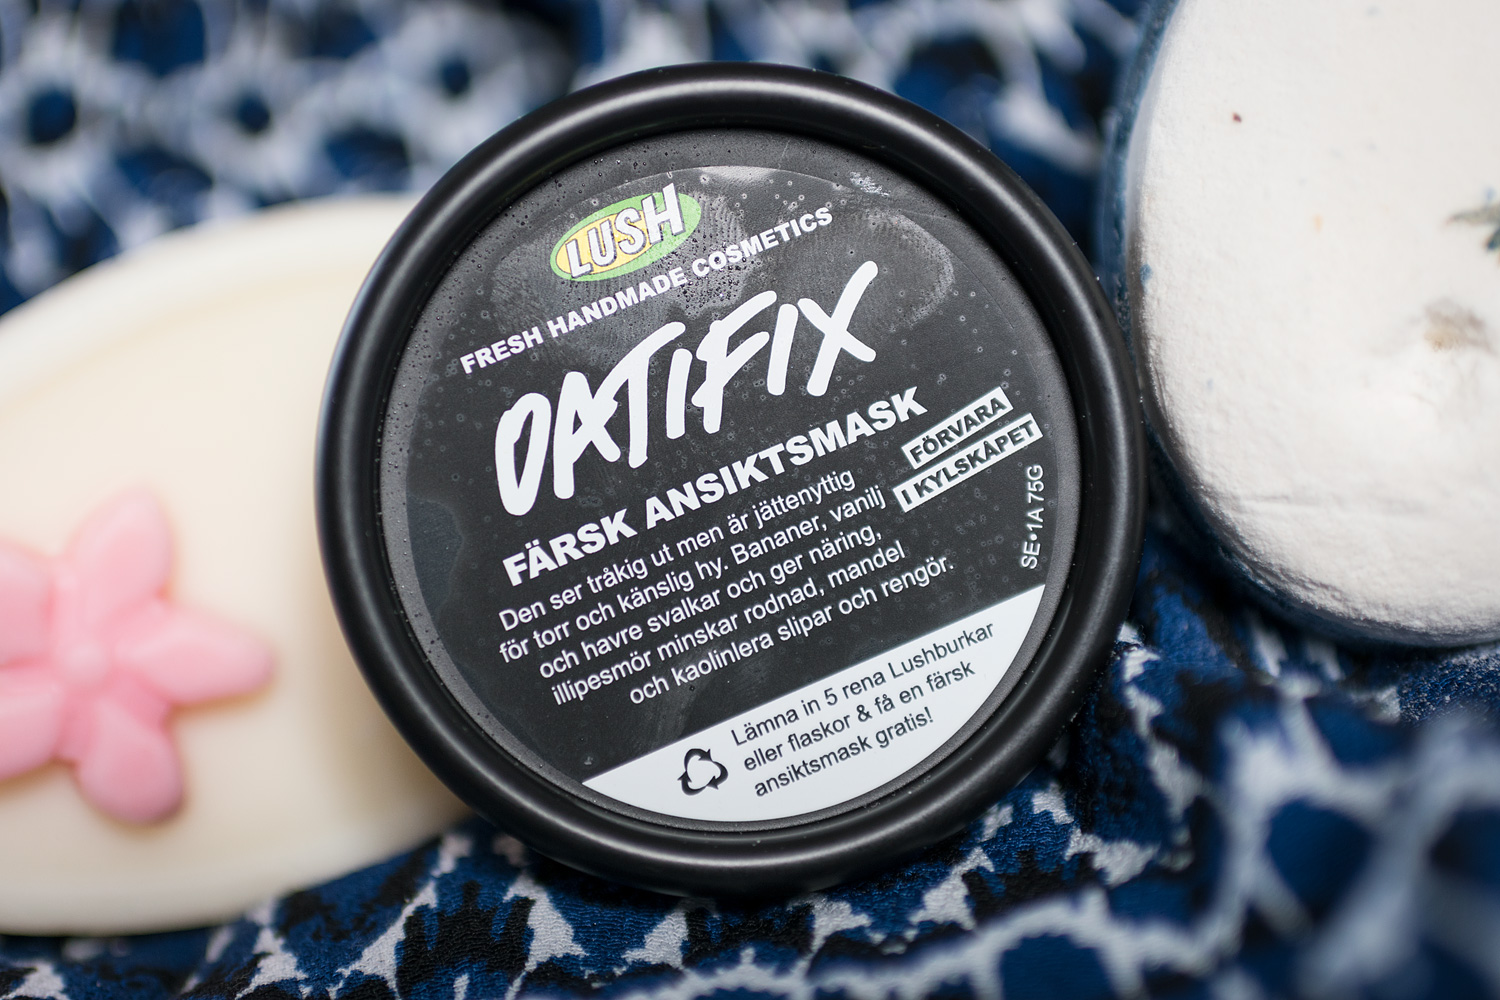 lush oatifix t'eo deo tender is the night lip color